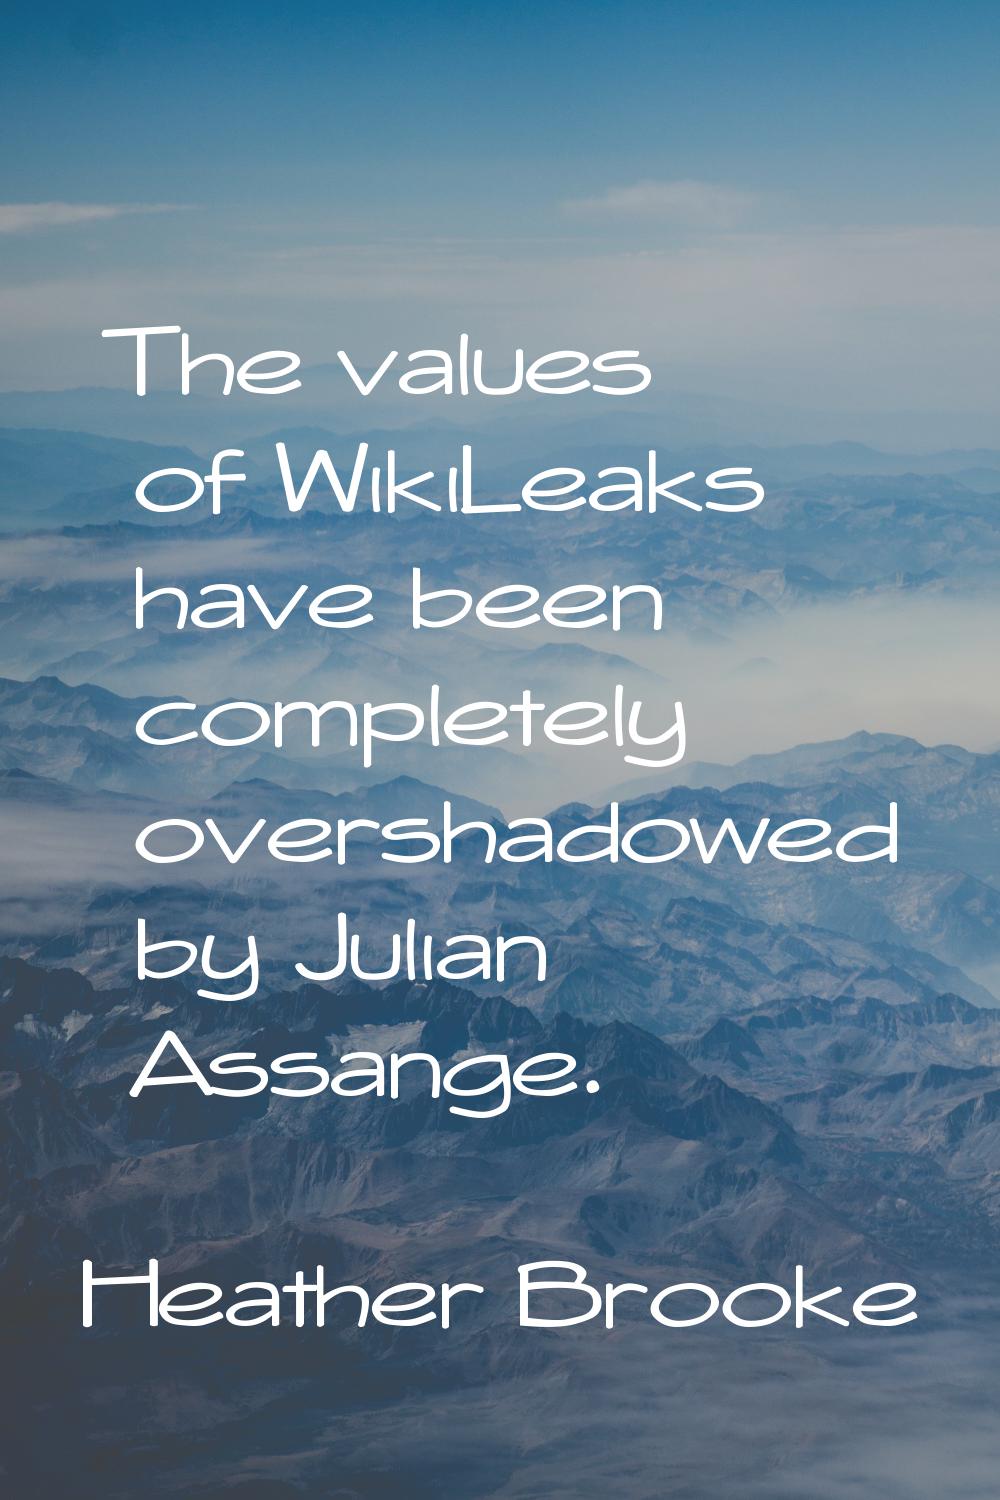 The values of WikiLeaks have been completely overshadowed by Julian Assange.